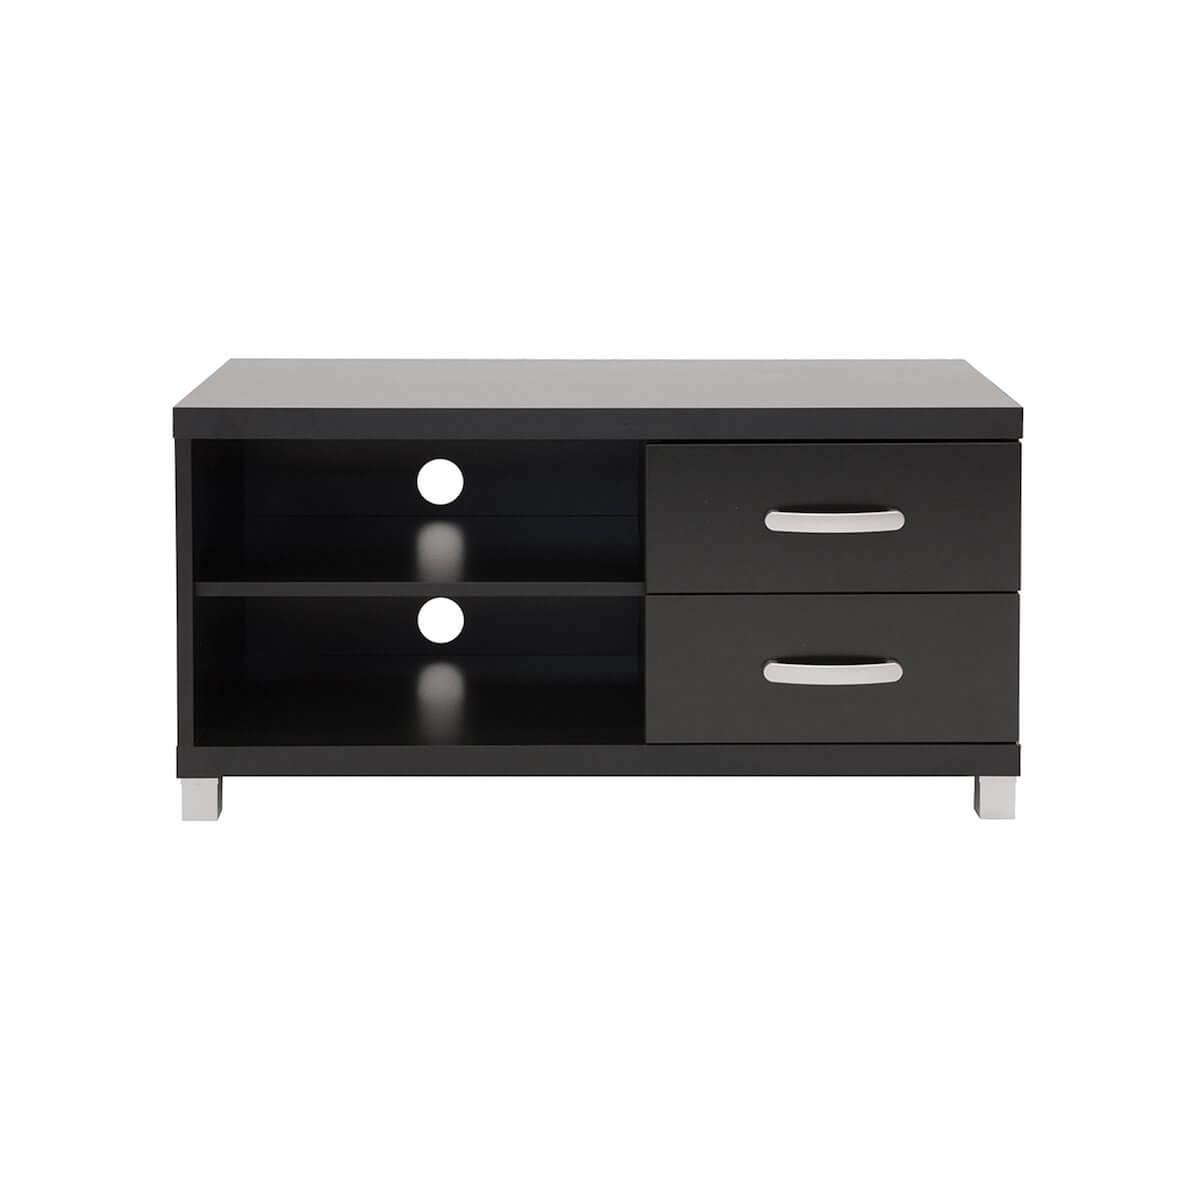 Techni Mobili Black Modern TV Stand with Storage for TVs Up To 40" RTA-8896-BK